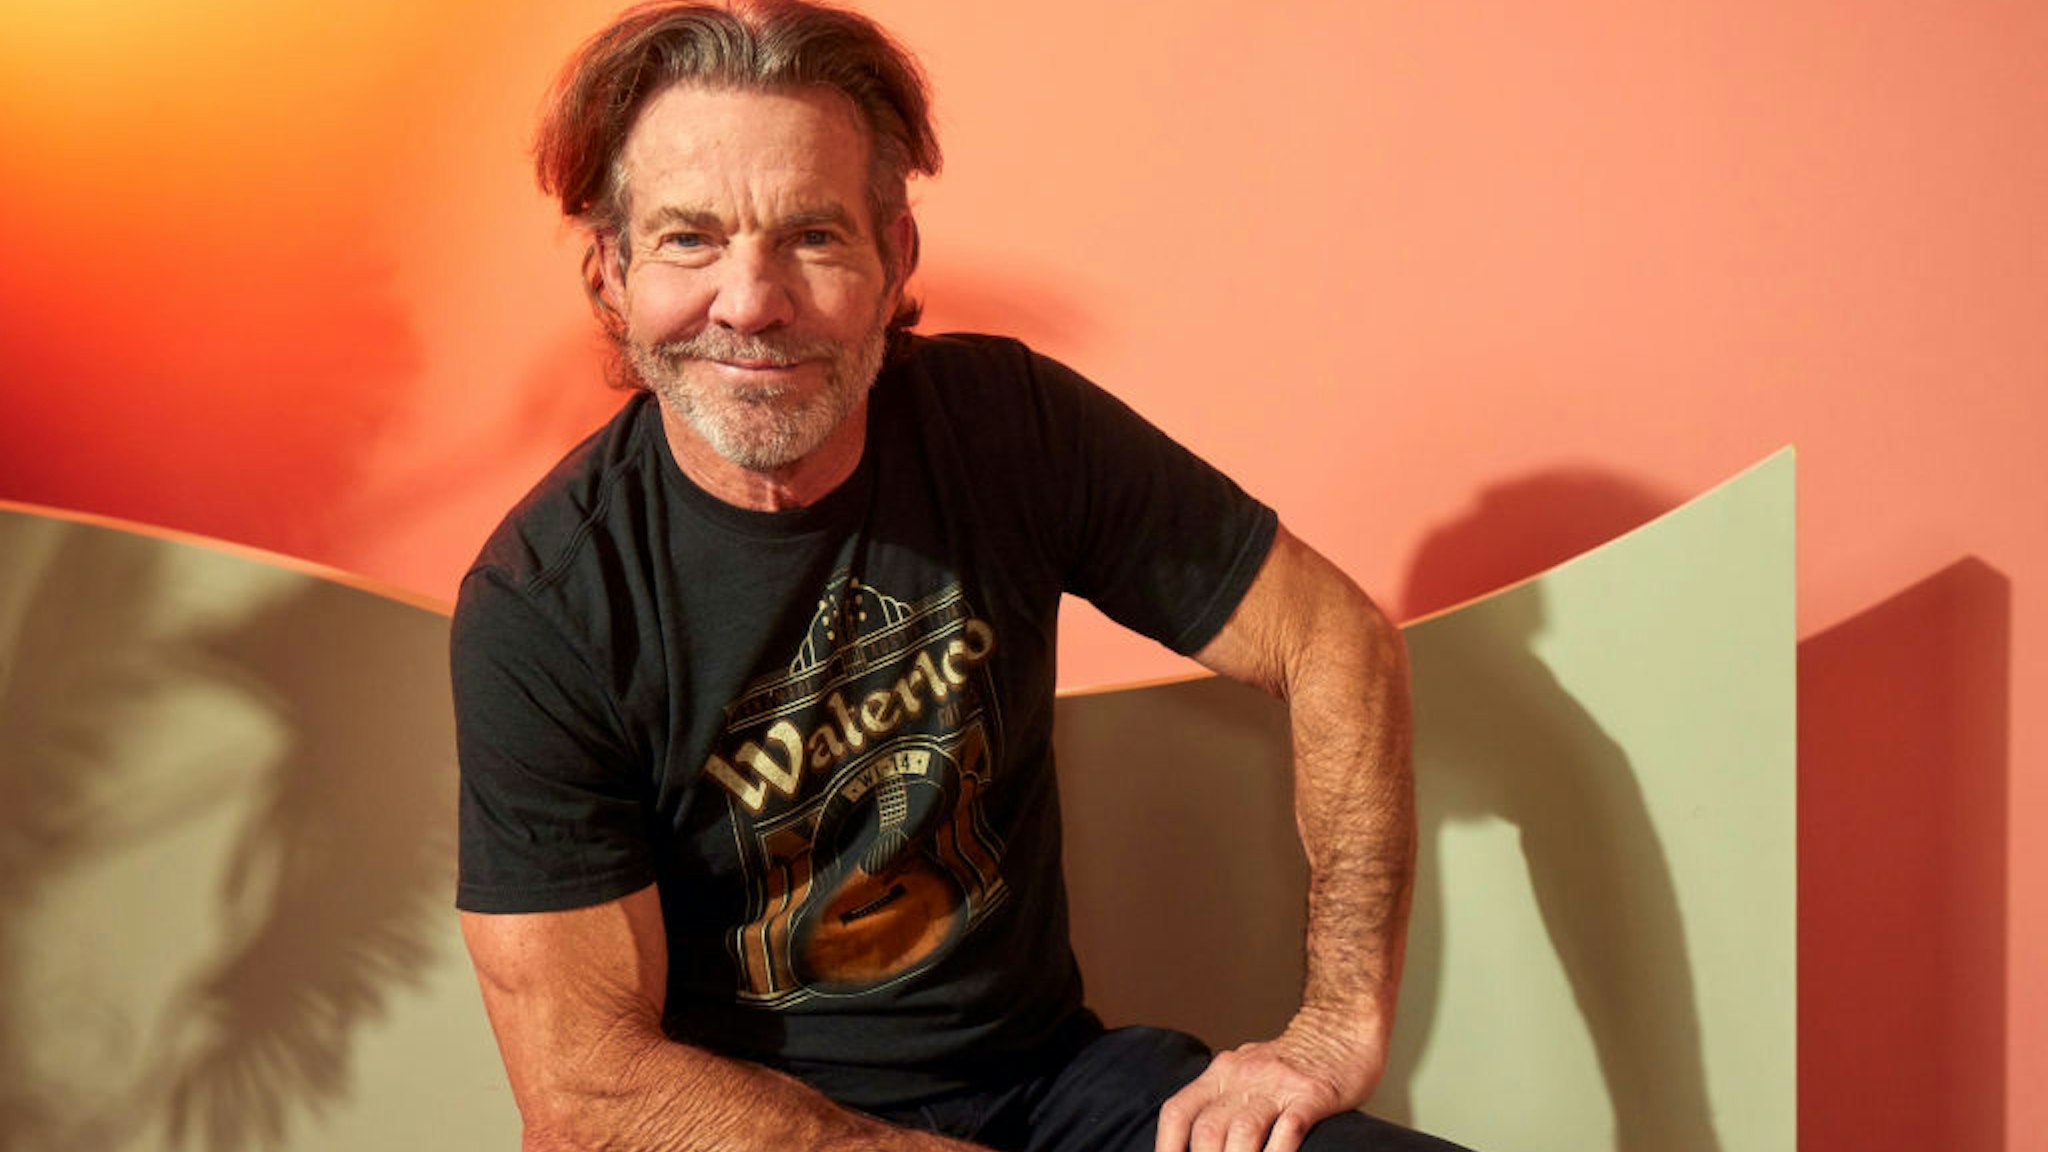 AUSTIN, TEXAS - MARCH 12: Dennis Quaid visits the IMDb Portrait Studio at SXSW 2023 on March 12, 2023 in Austin, Texas. (Photo by Corey Nickols/Getty Images for IMDb)